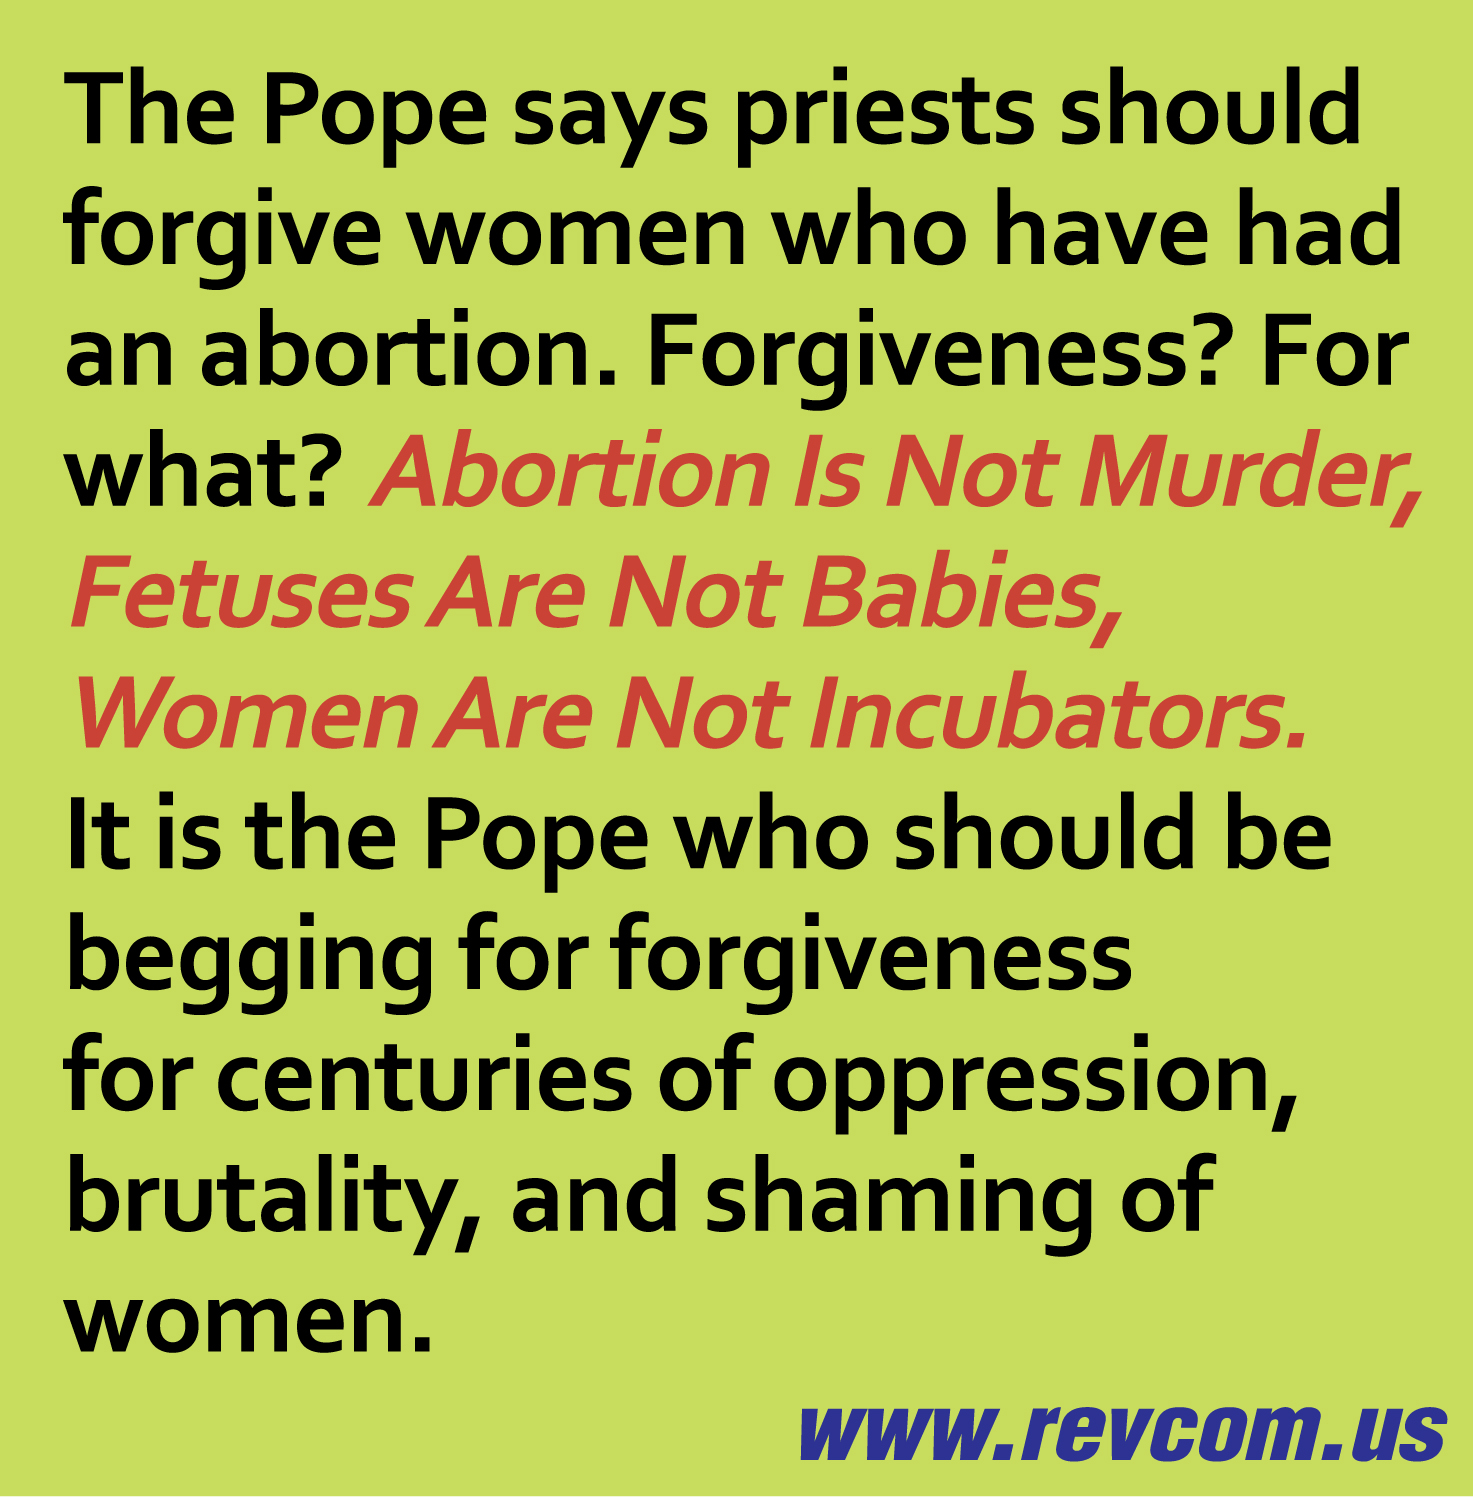 The Pope says priests should forgive women who have had an abortion. Foregiveness? For what?